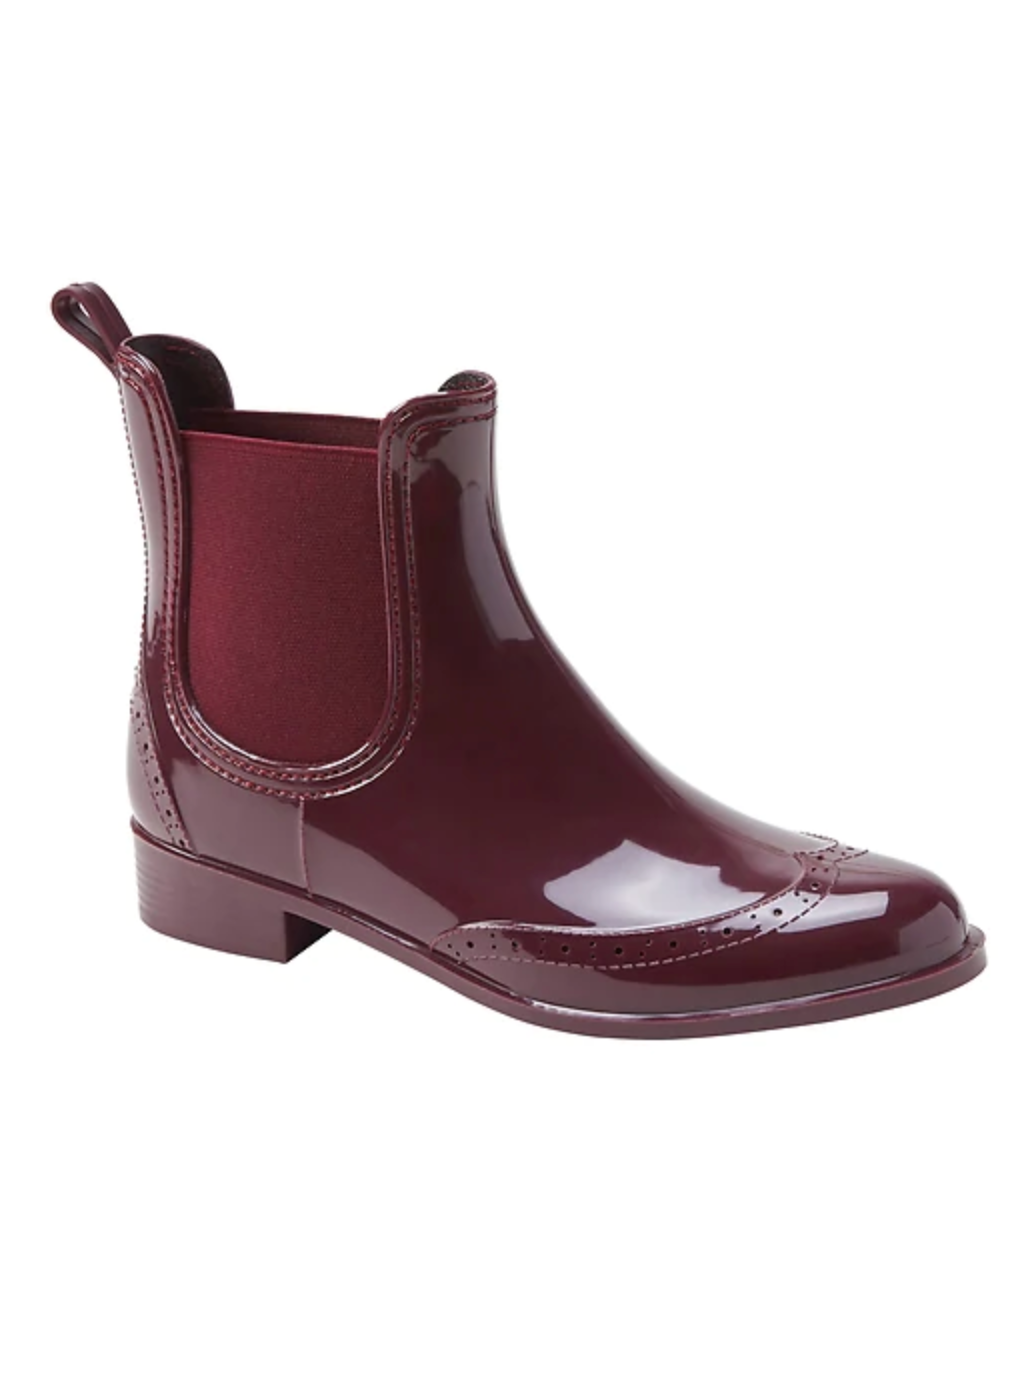 Keep It Cute With These Chic Rain Boots For Gloomy Days